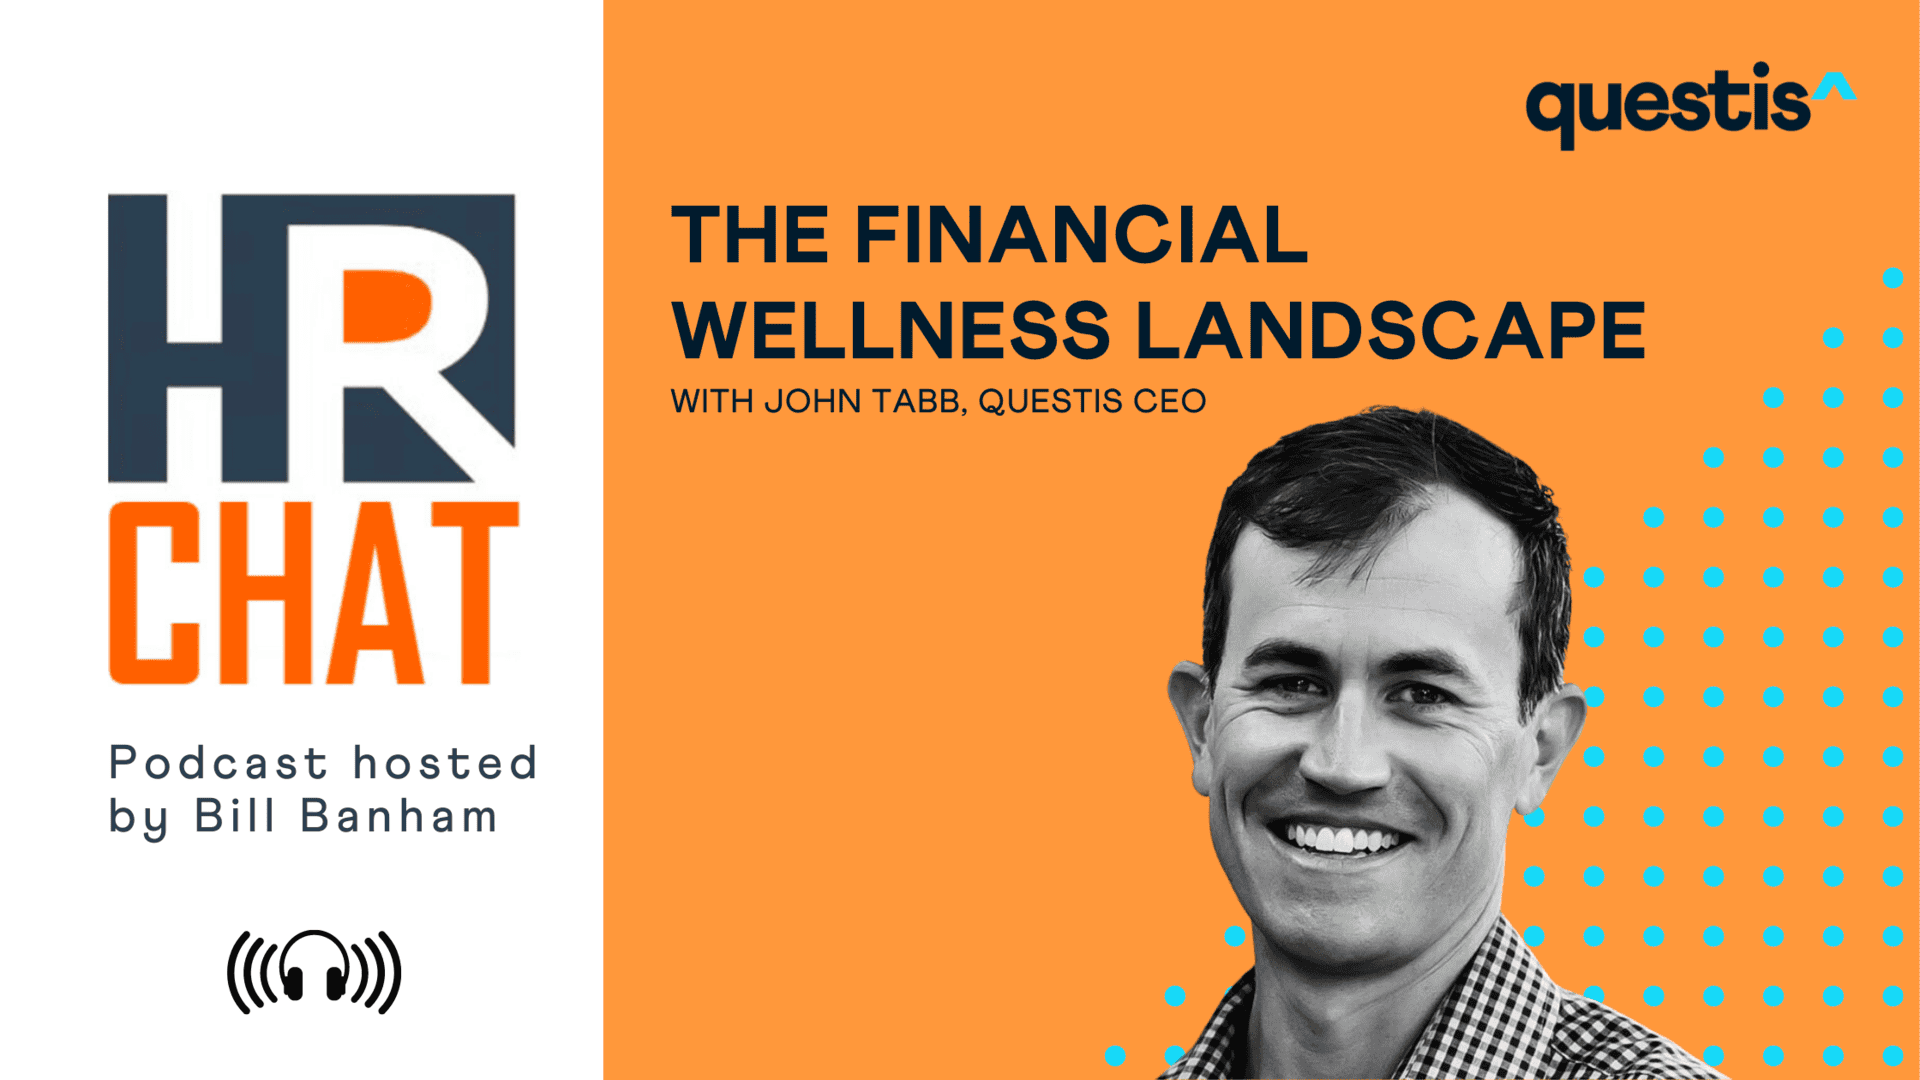 Blog Hero - HRchat Podcast - The Financial Wellness Landscape with John Tabb